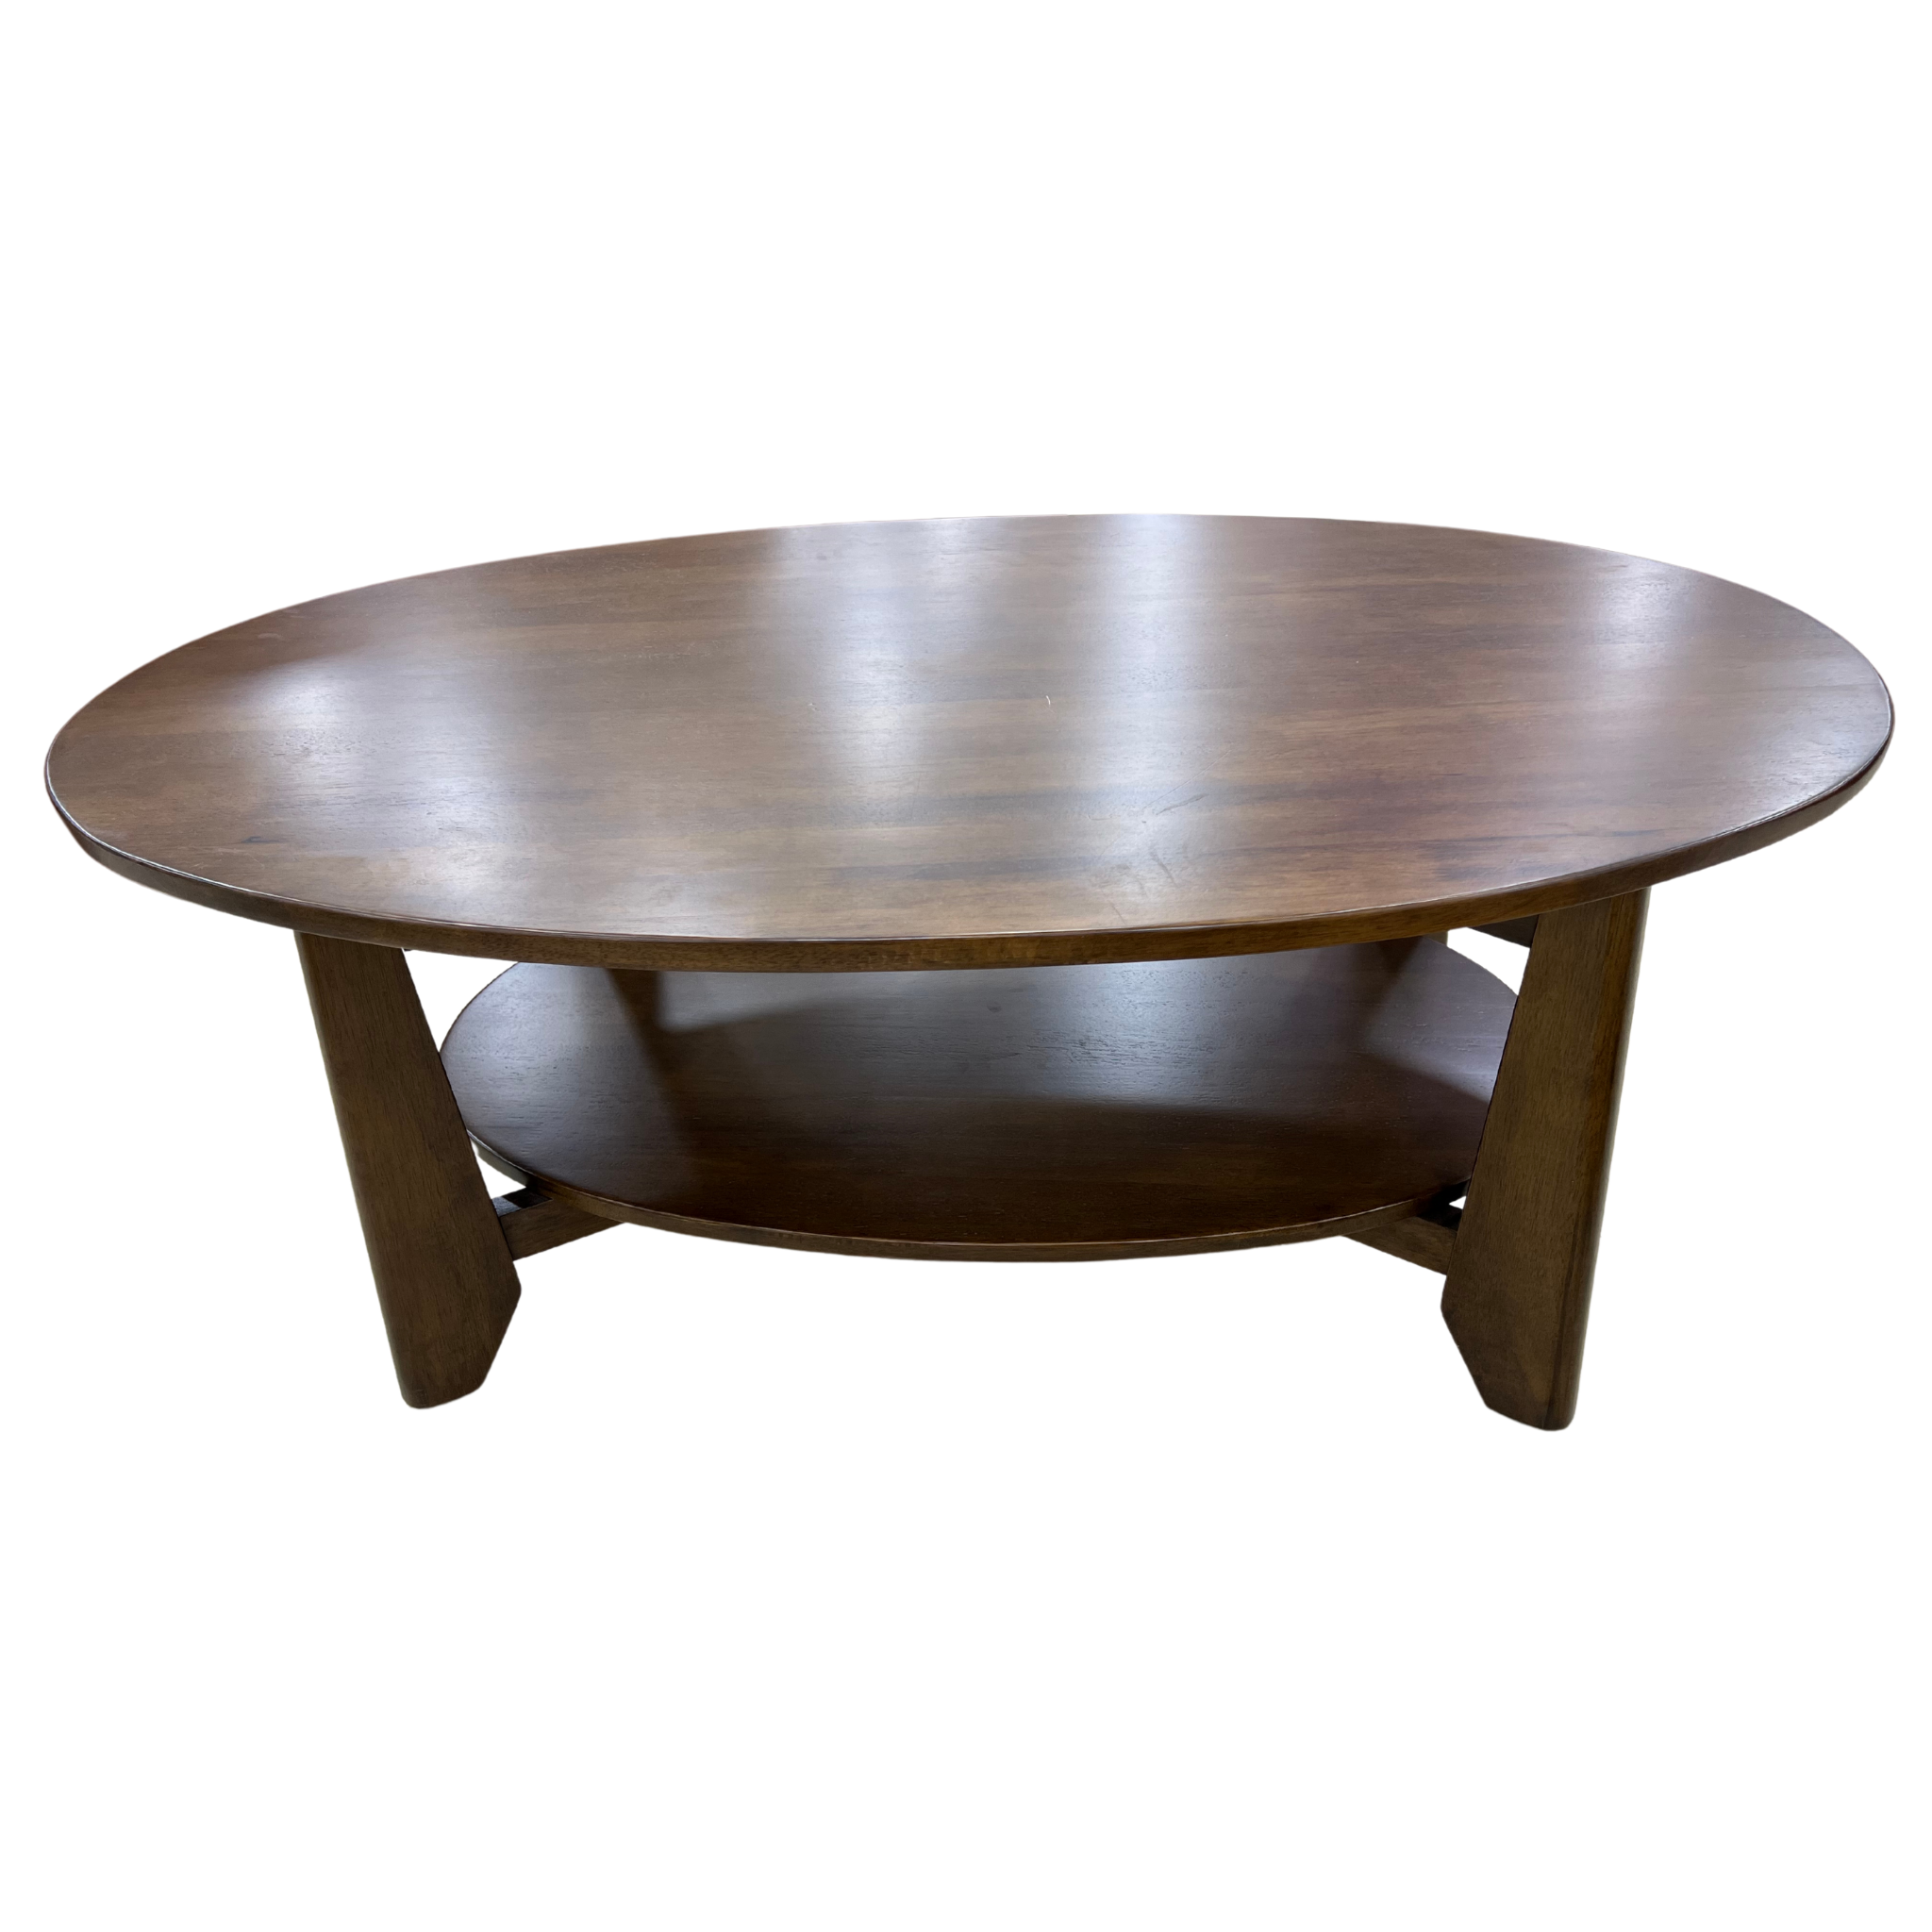 Tuscon Wooden Coffee Table